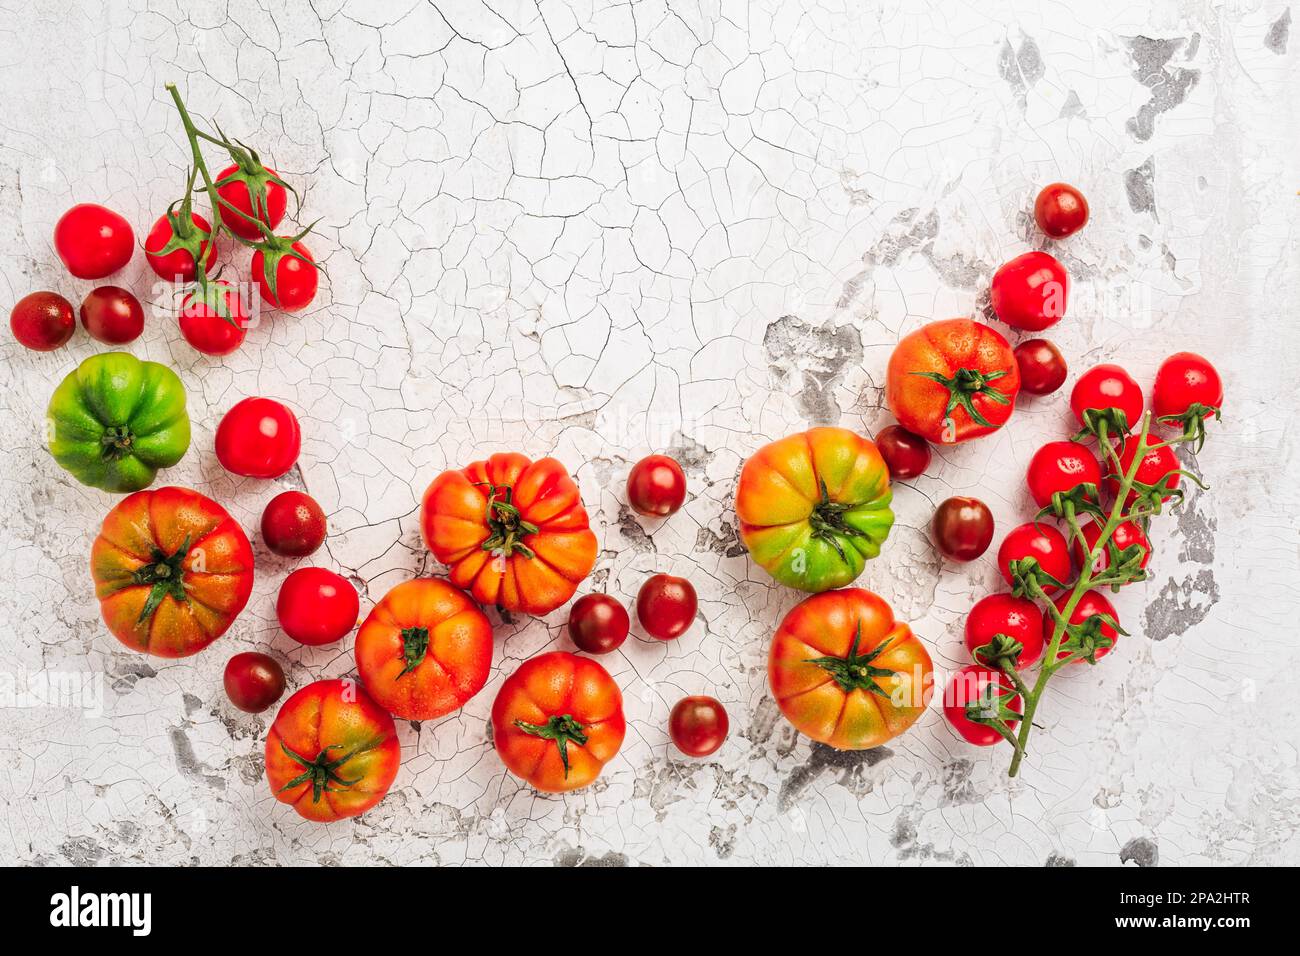 Assortment of organic tomatoes on old kitchen table Stock Photo